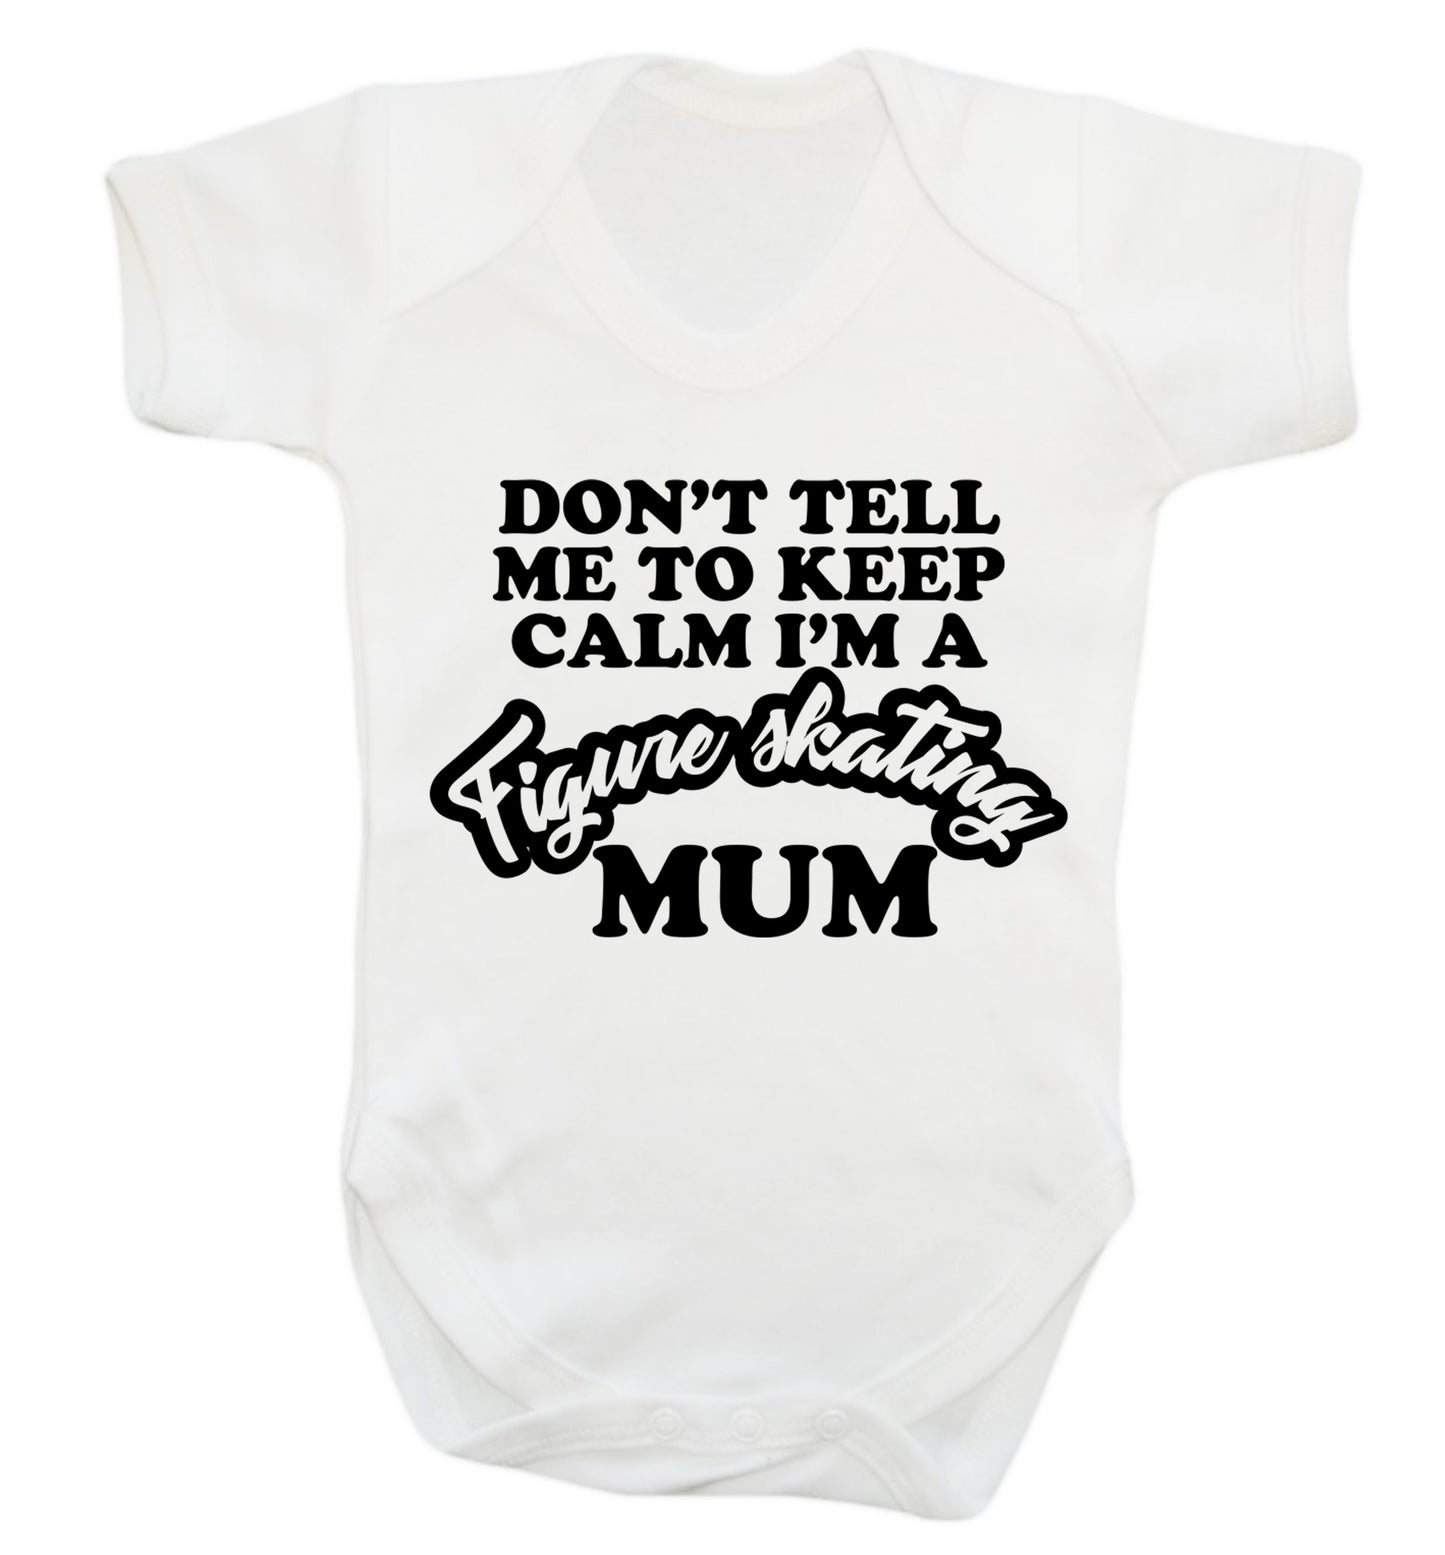 Don't tell me to keep calm I'm a figure skating mum Baby Vest white 18-24 months